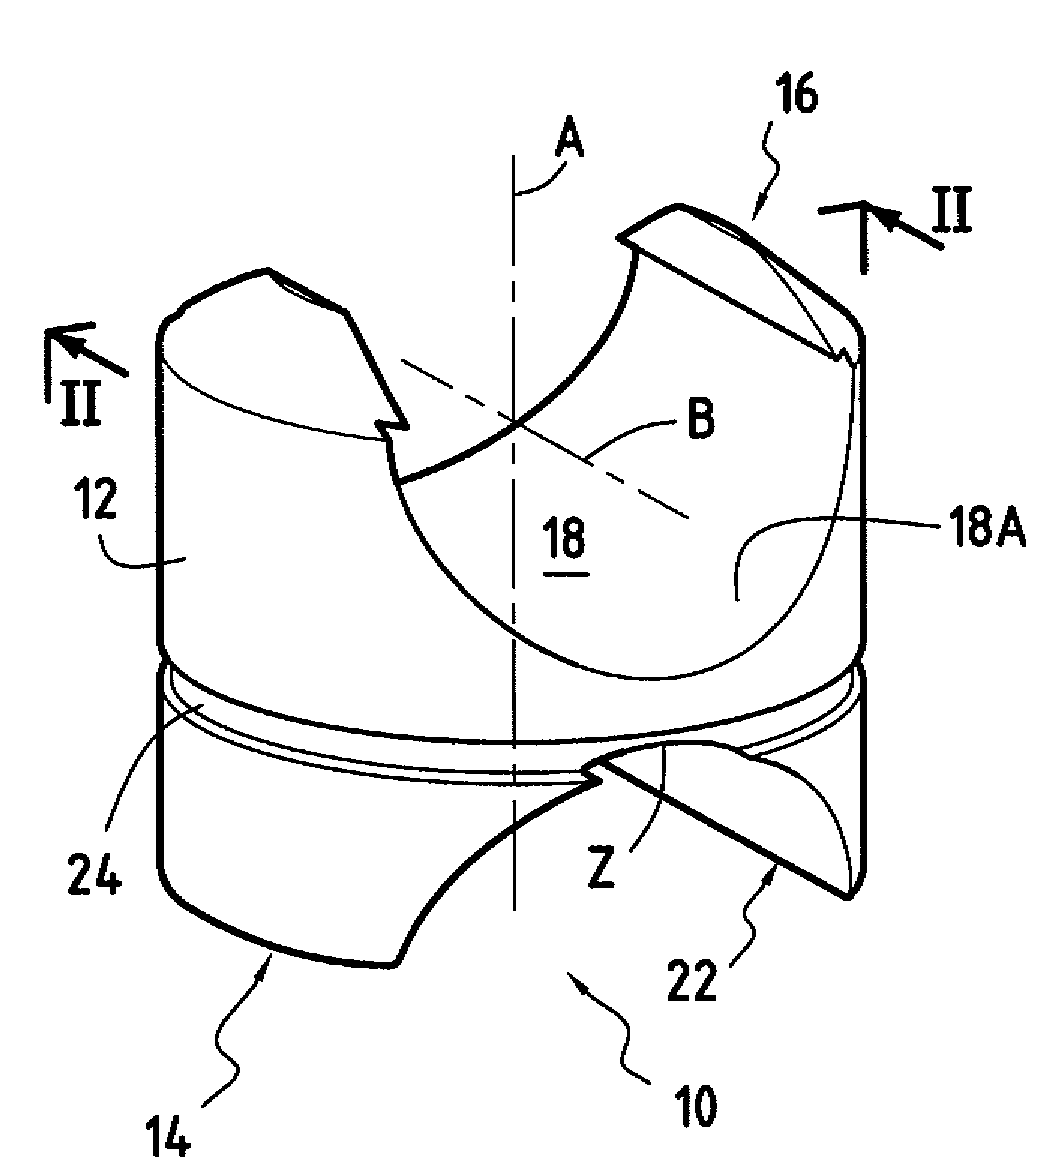 Piston for a hydraulic motor having radial pistons, and a method of manufacturing such a piston